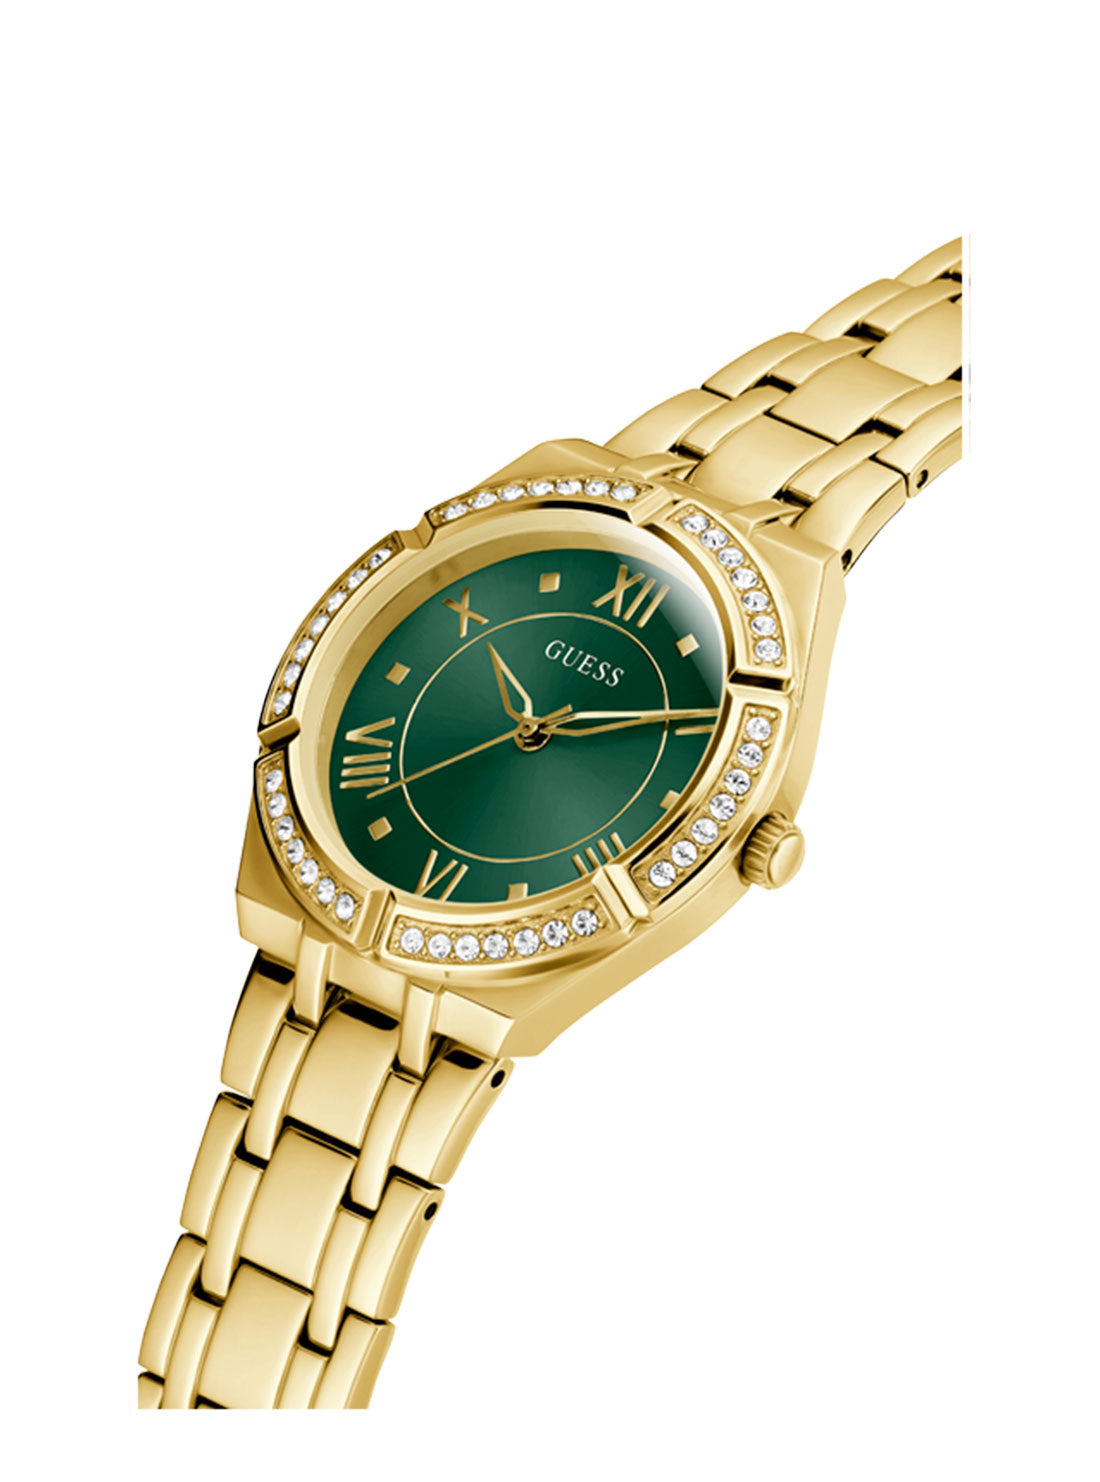 GUESS Women's Gold Cosmo Green Crystal Watch GW0033L8 Angle View